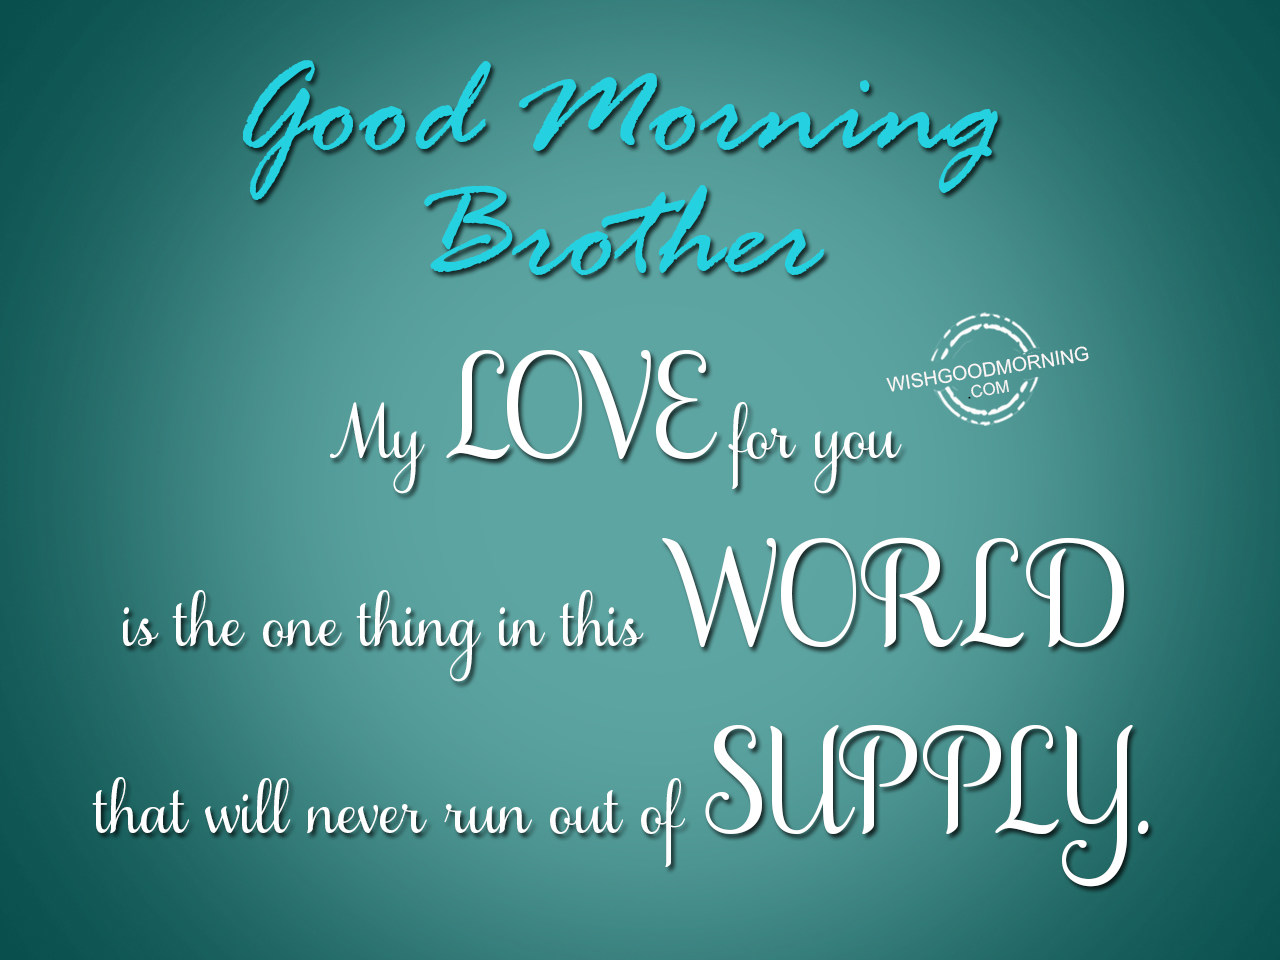 My love for you brother - Good Morning Pictures – WishGoodMorning.com